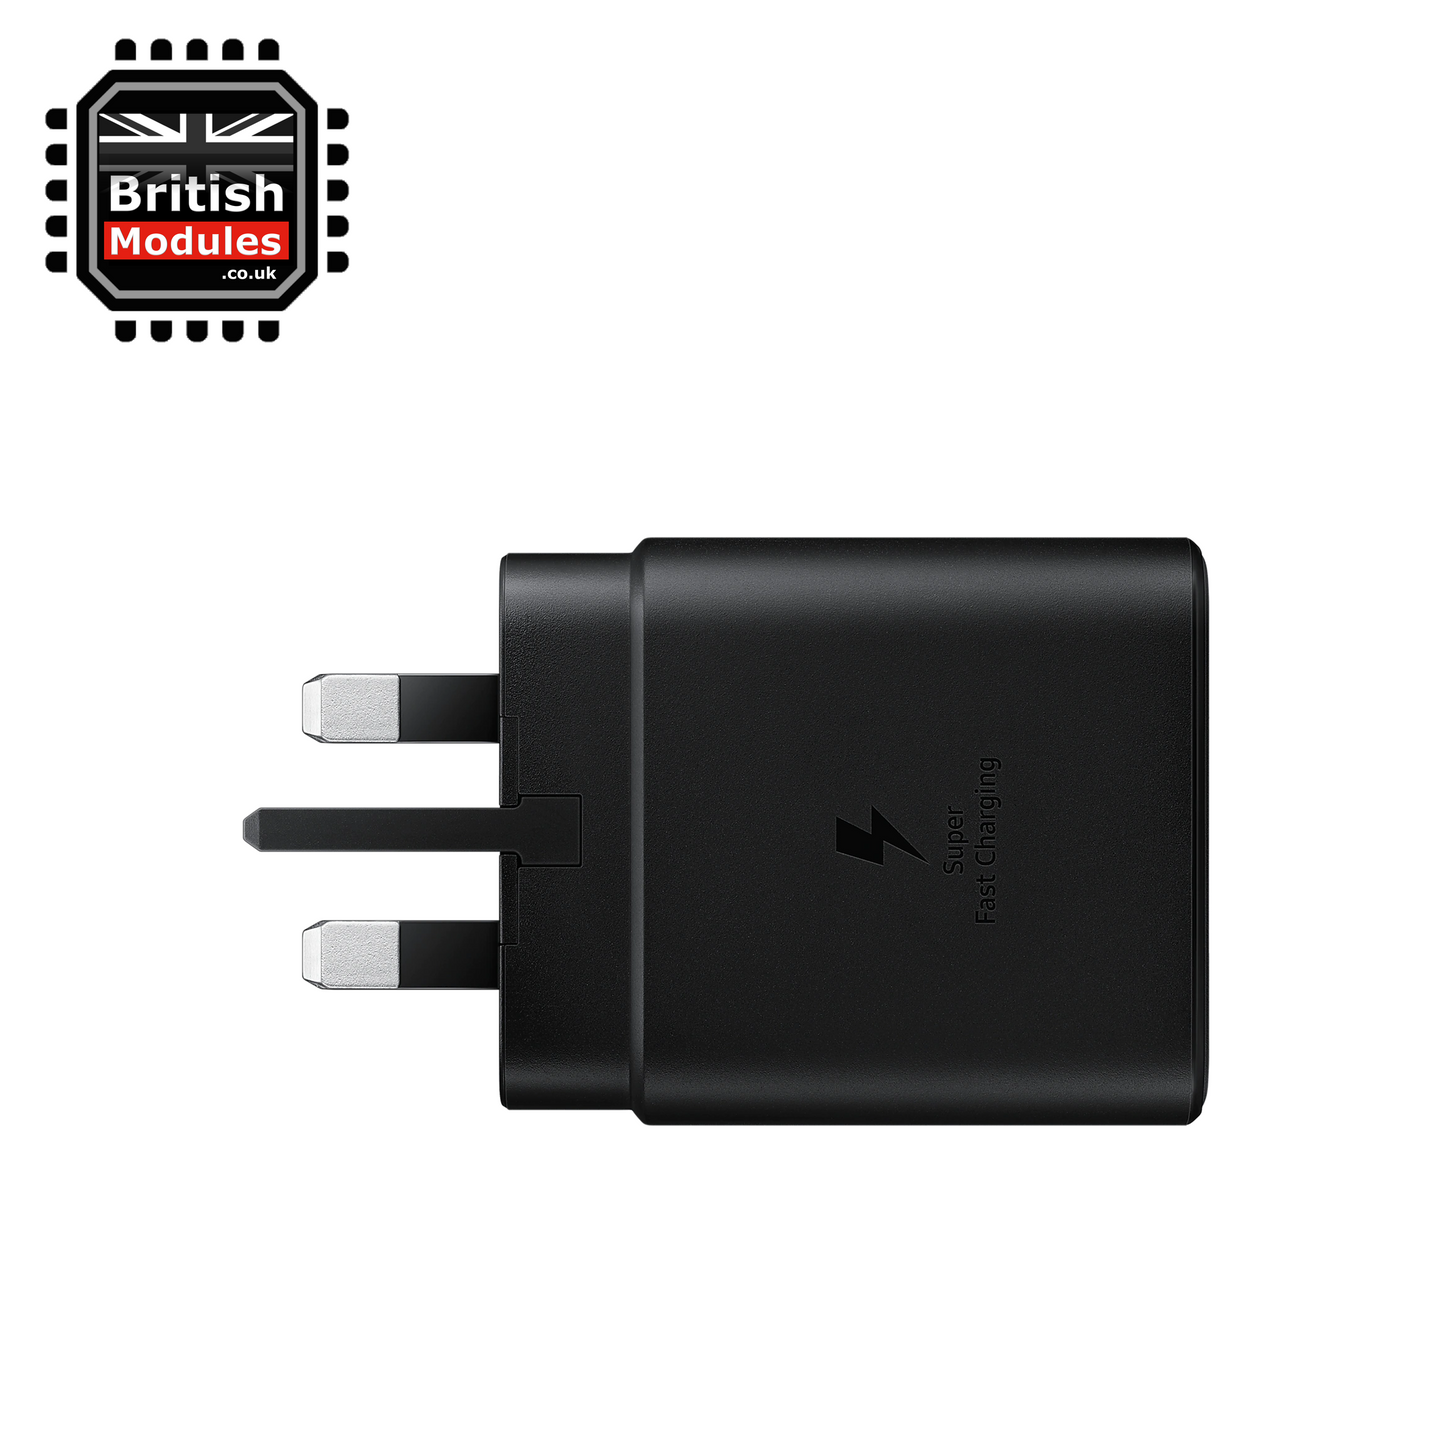 Samsung 45W TA845 Charger Travel Adapter USB-C UK Mains + USB-C to USB-C Super Fast Charging Cable 1M Black